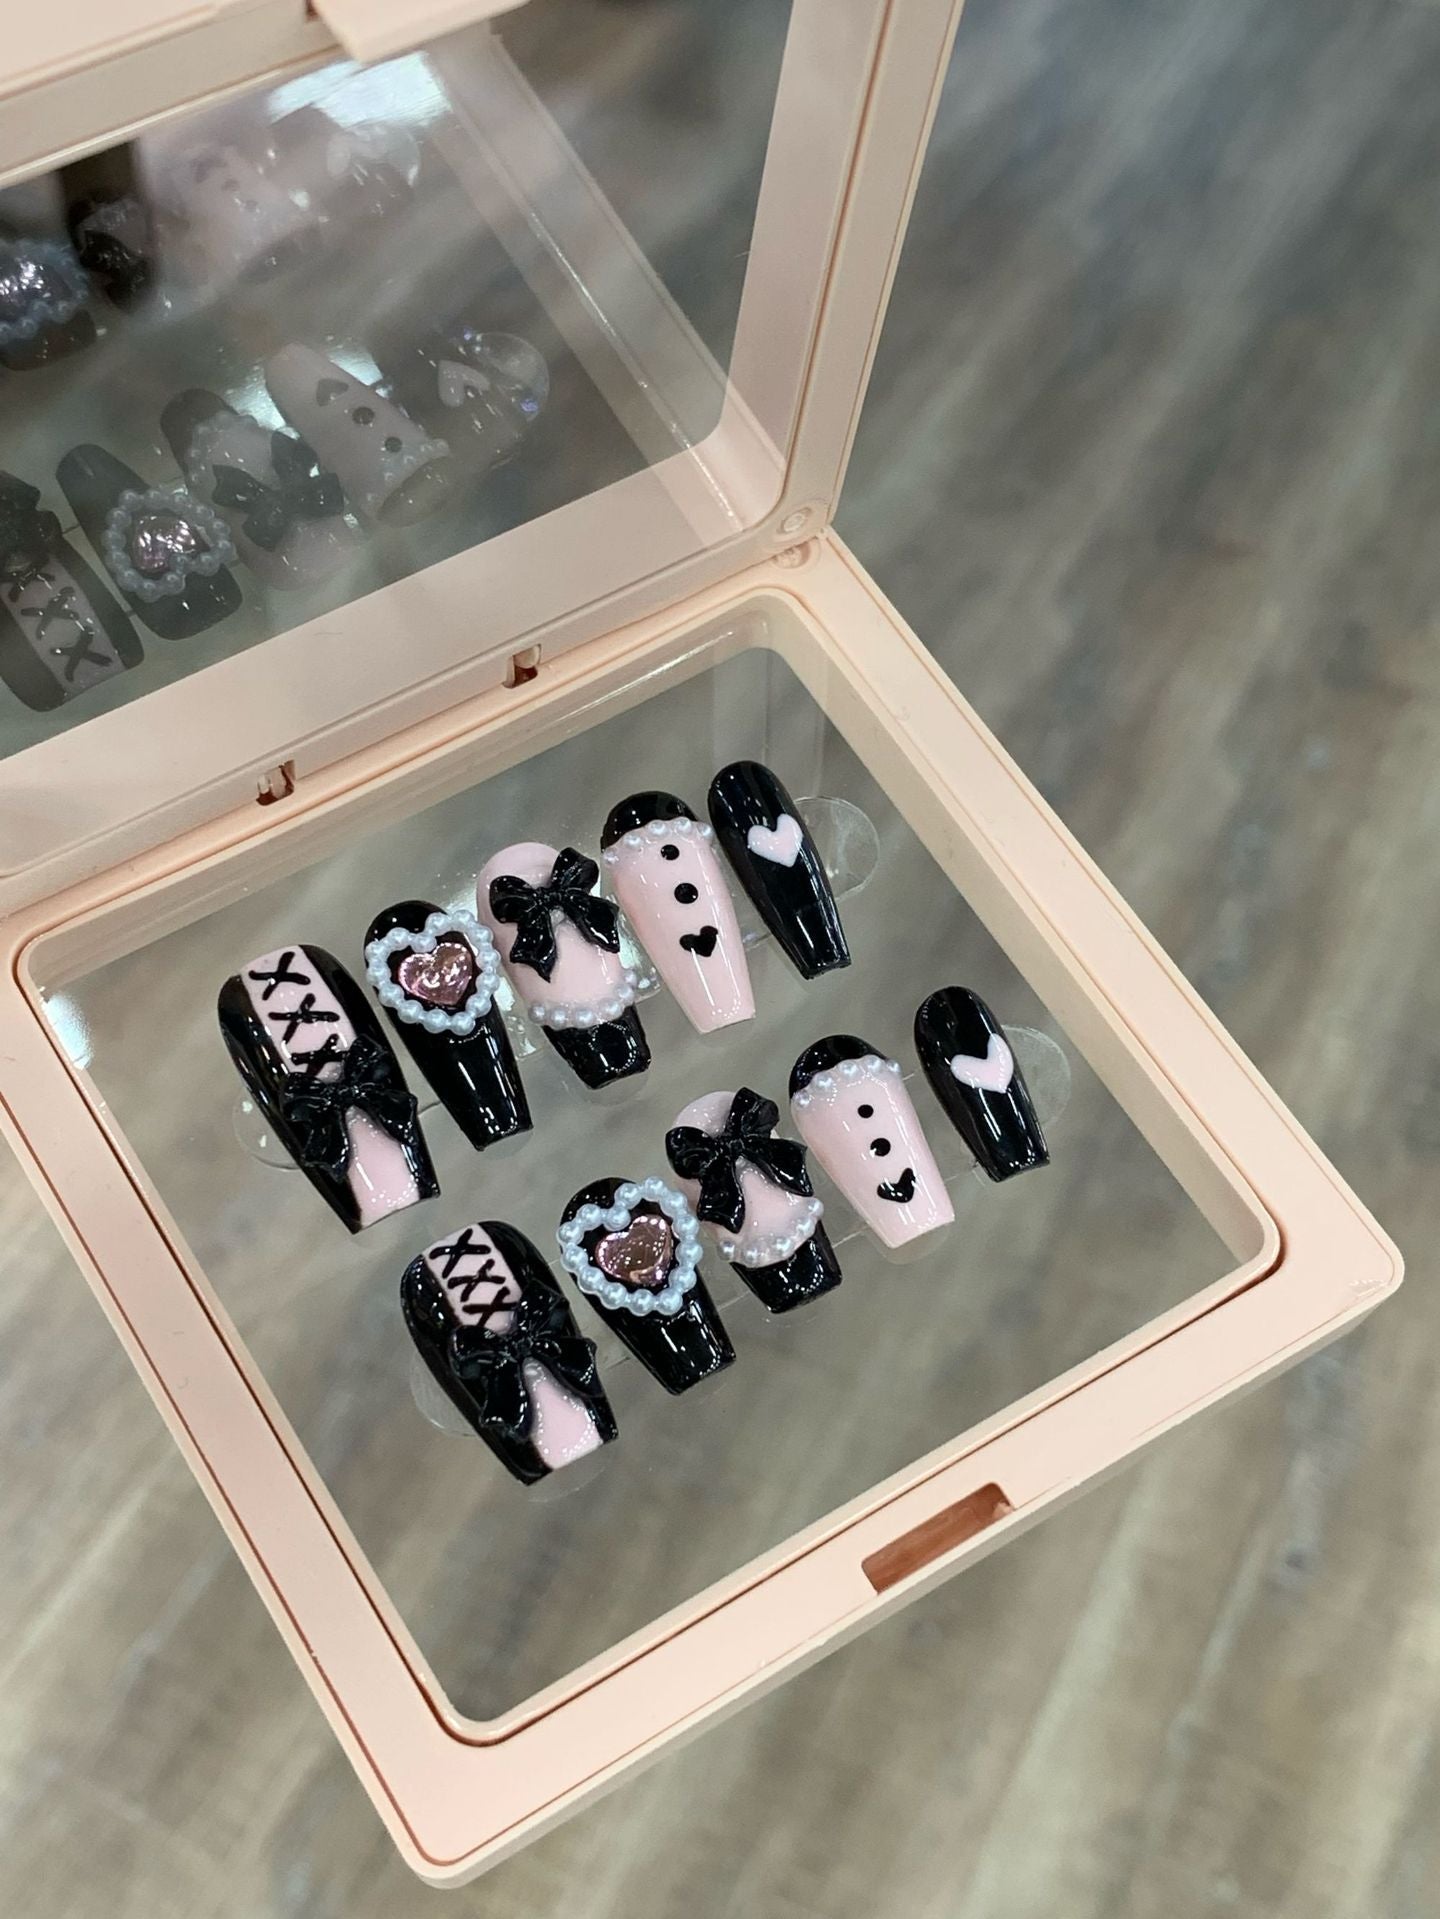 BLACK PINK PEACH HEART-TEN PIECES OF HANDCRAFTED PRESS ON NAIL